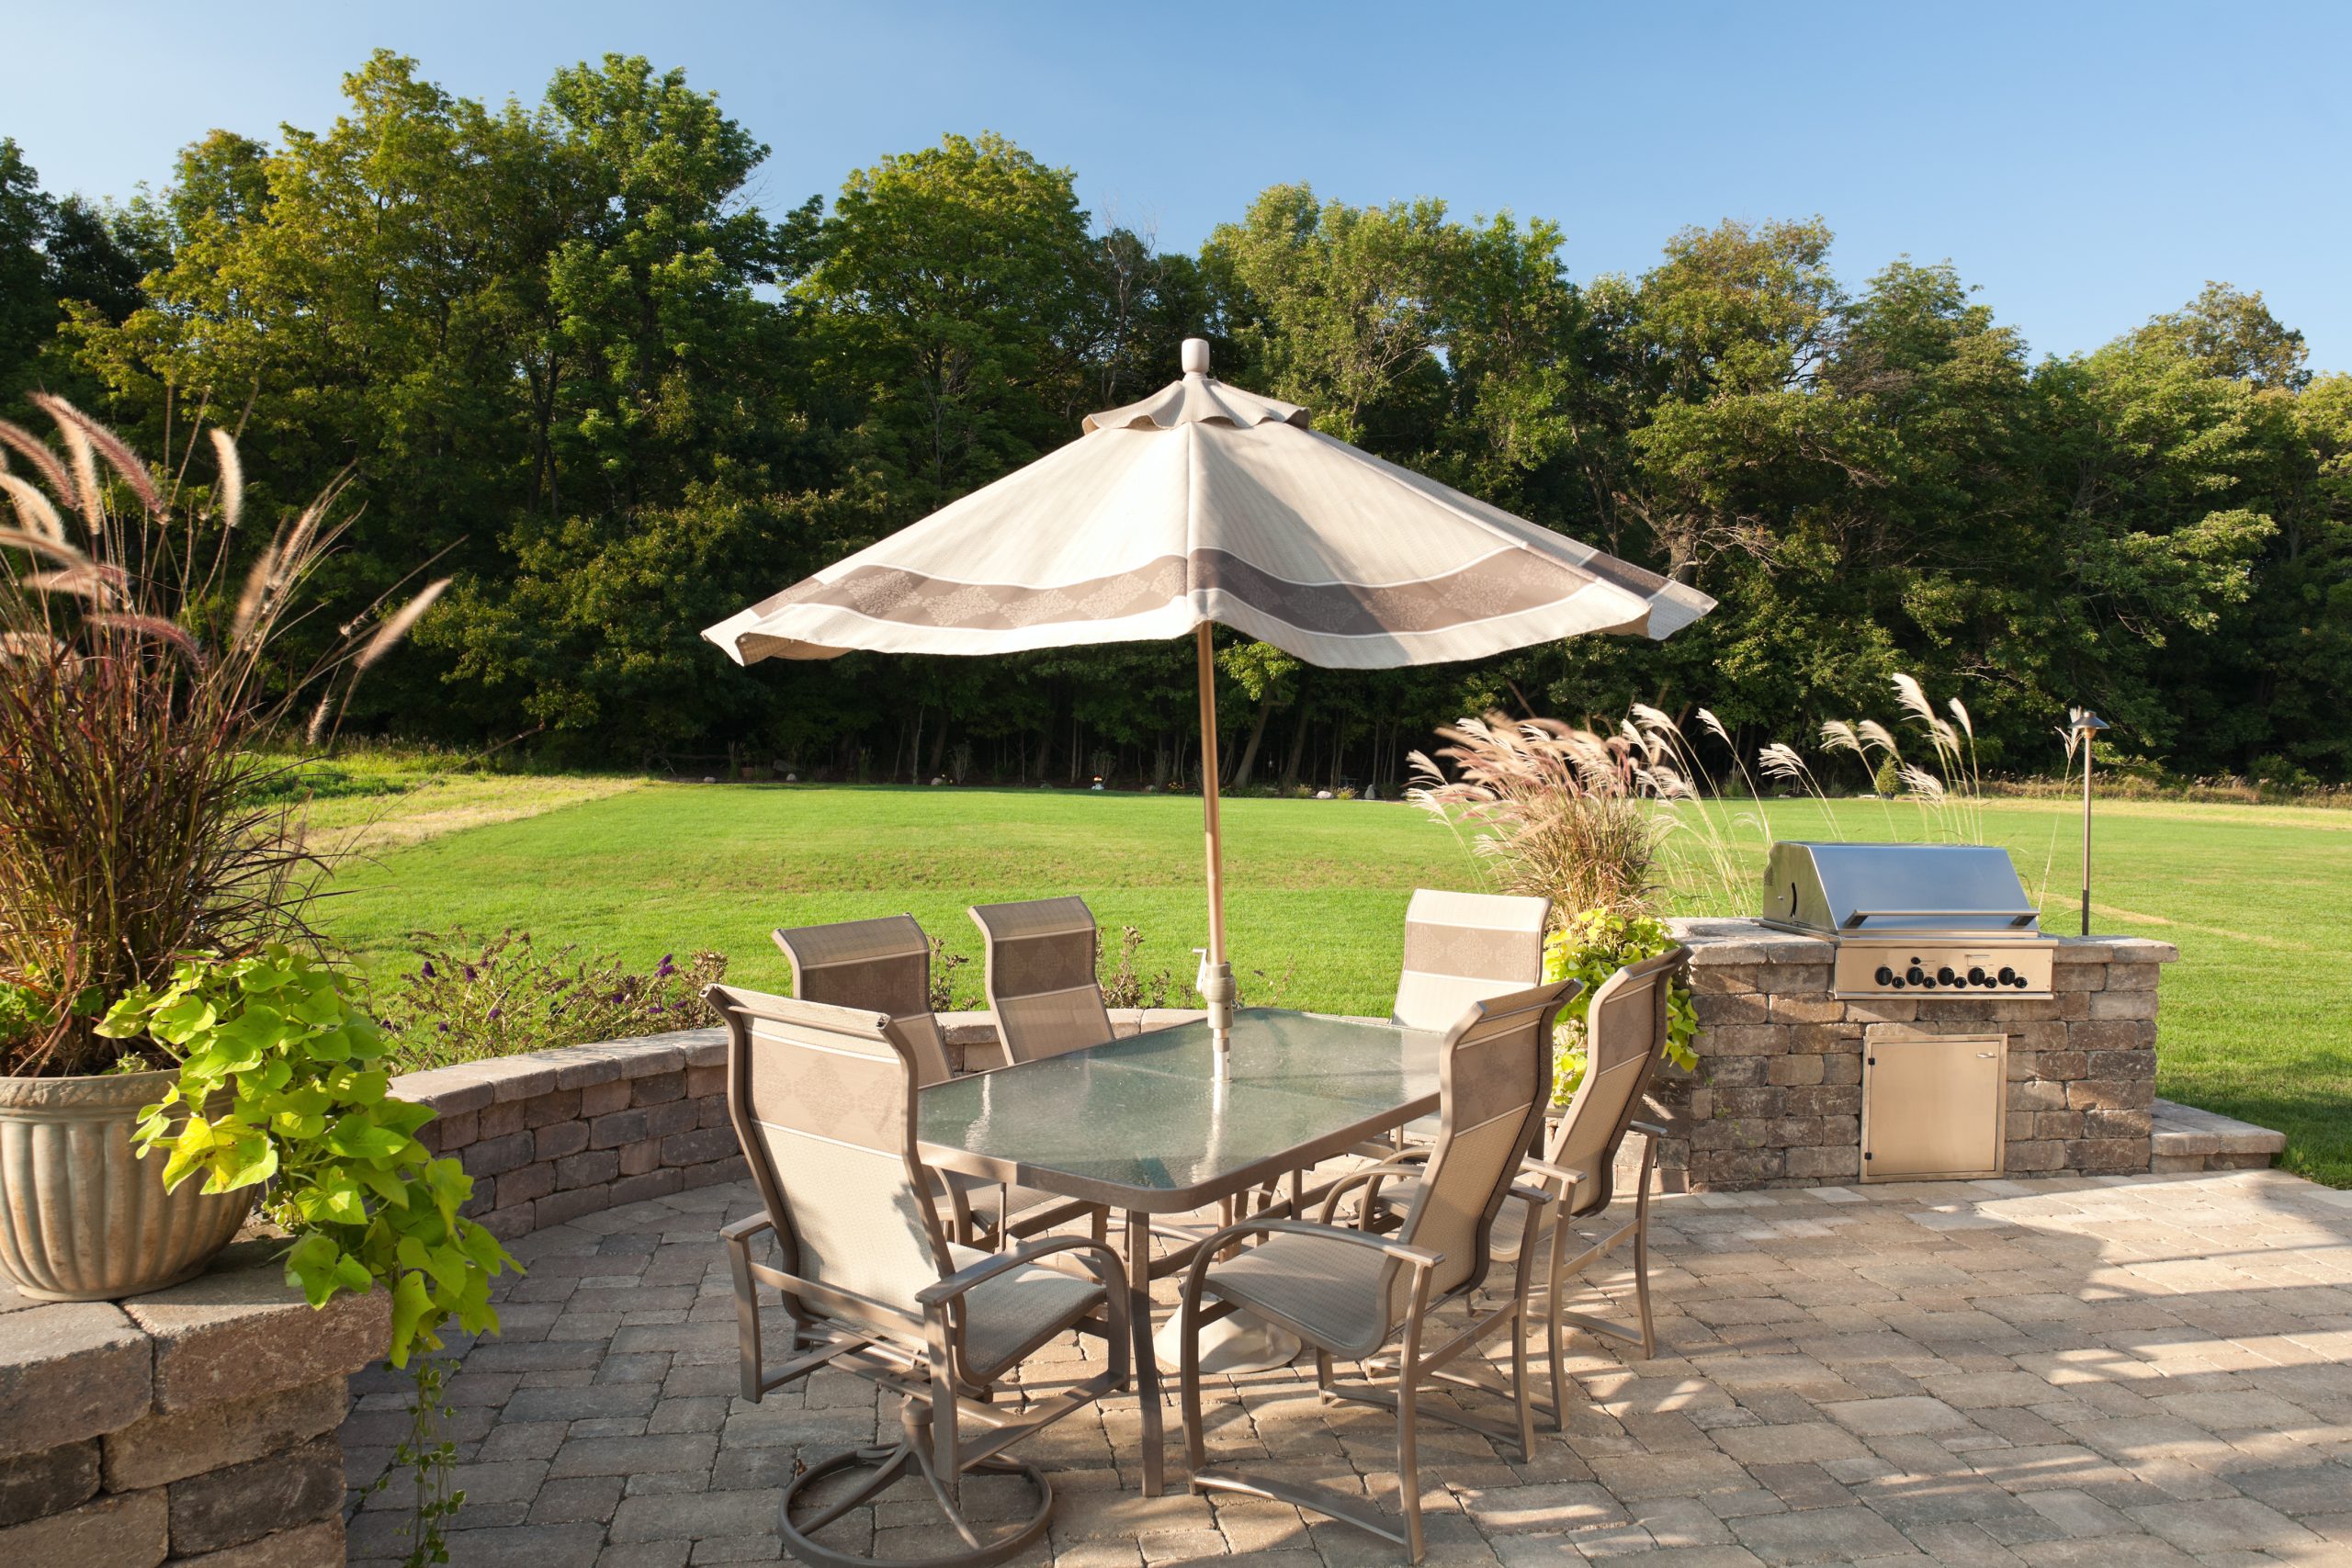 Outdoor living space, patio and chairs with barbeque in a serene summer setting with green grass and blue skies.